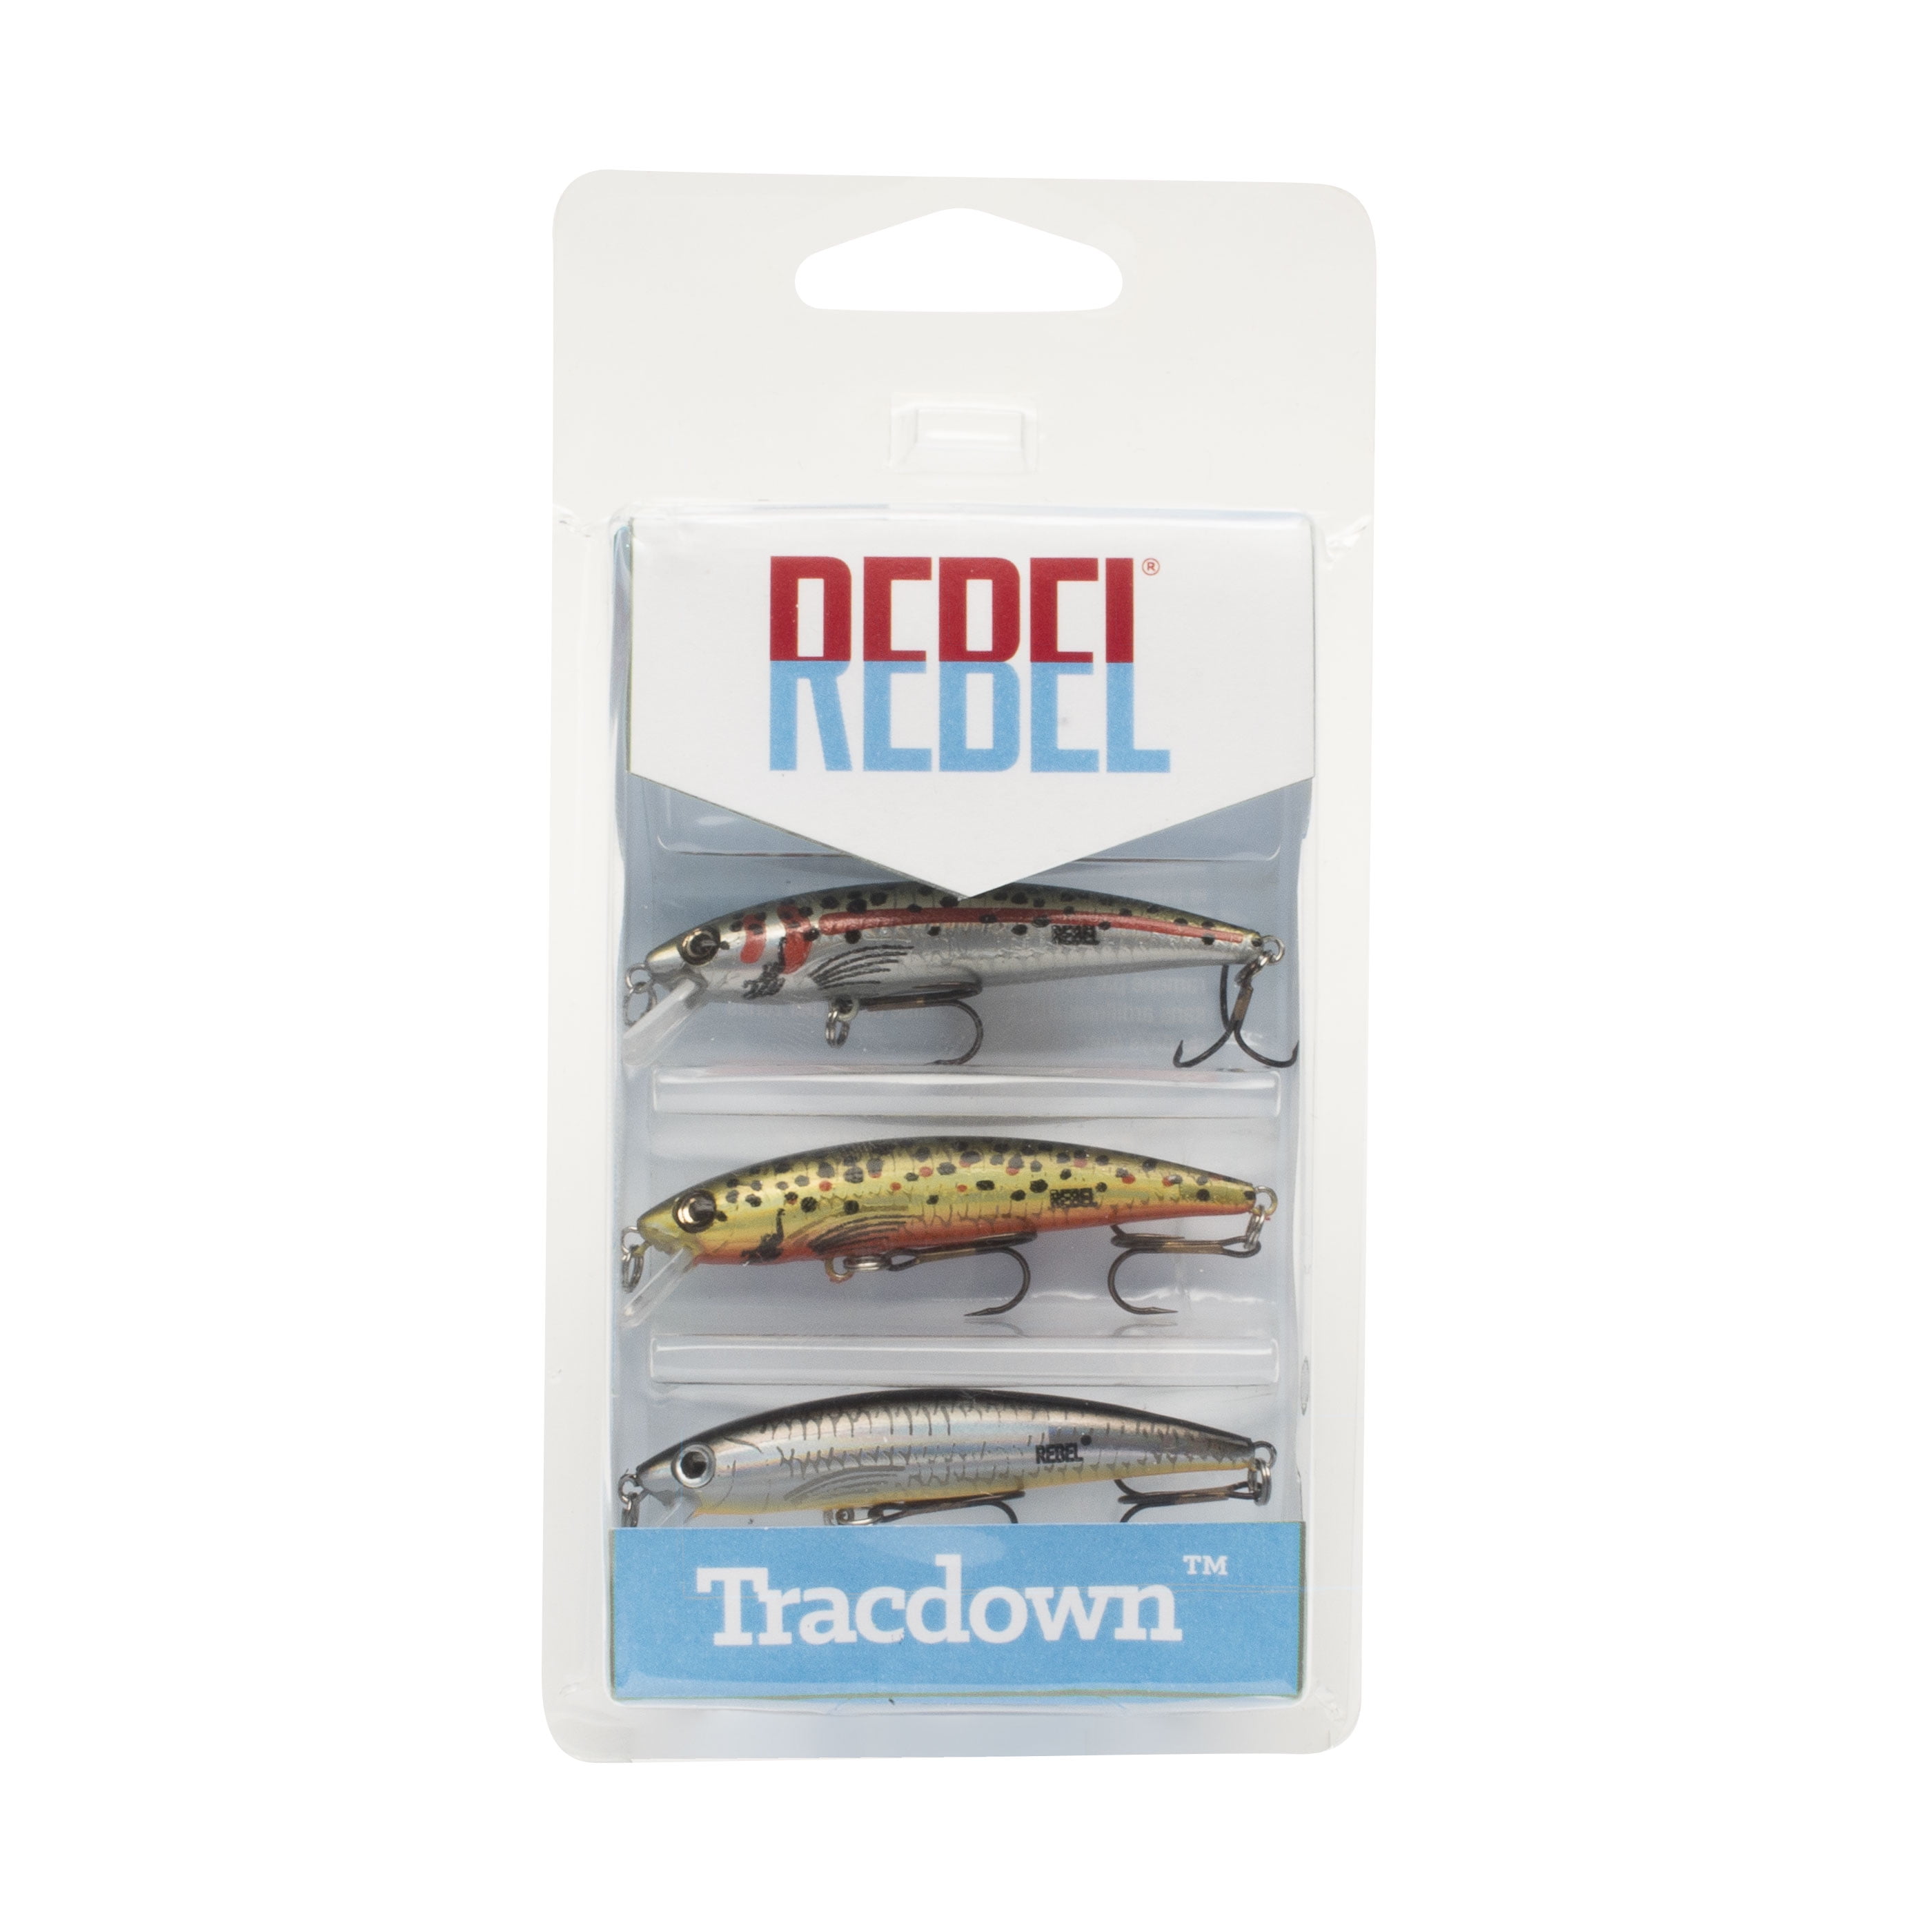 Rebel Releases New Lures Made For Kids MicroCritters feature kid-friendly  shapes and barbless hooks